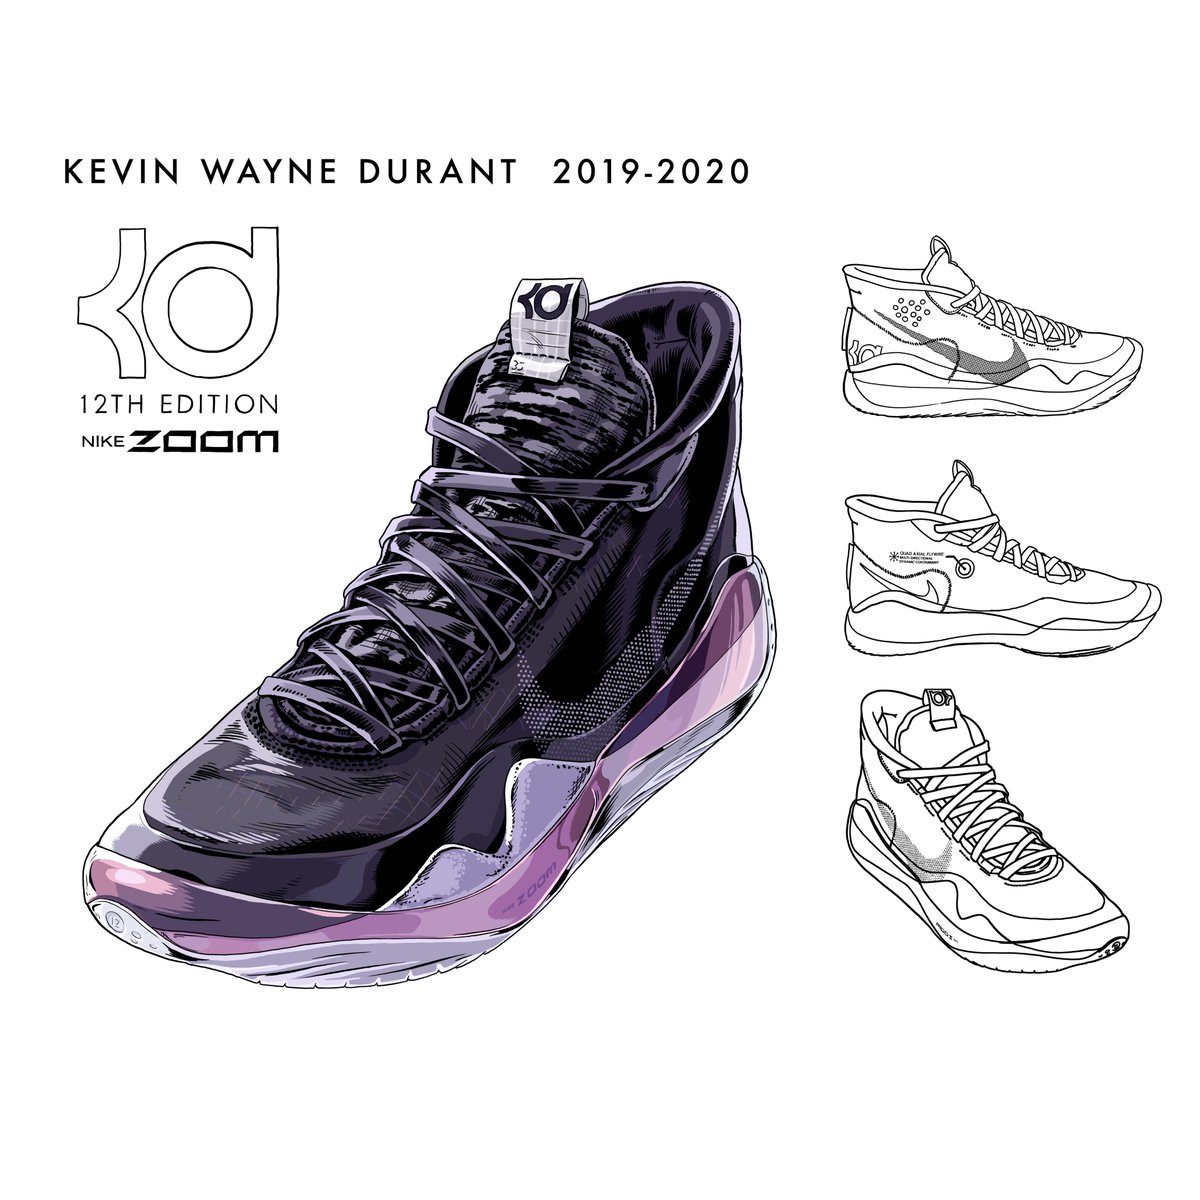 kevin wayne durant 12th edition shoes